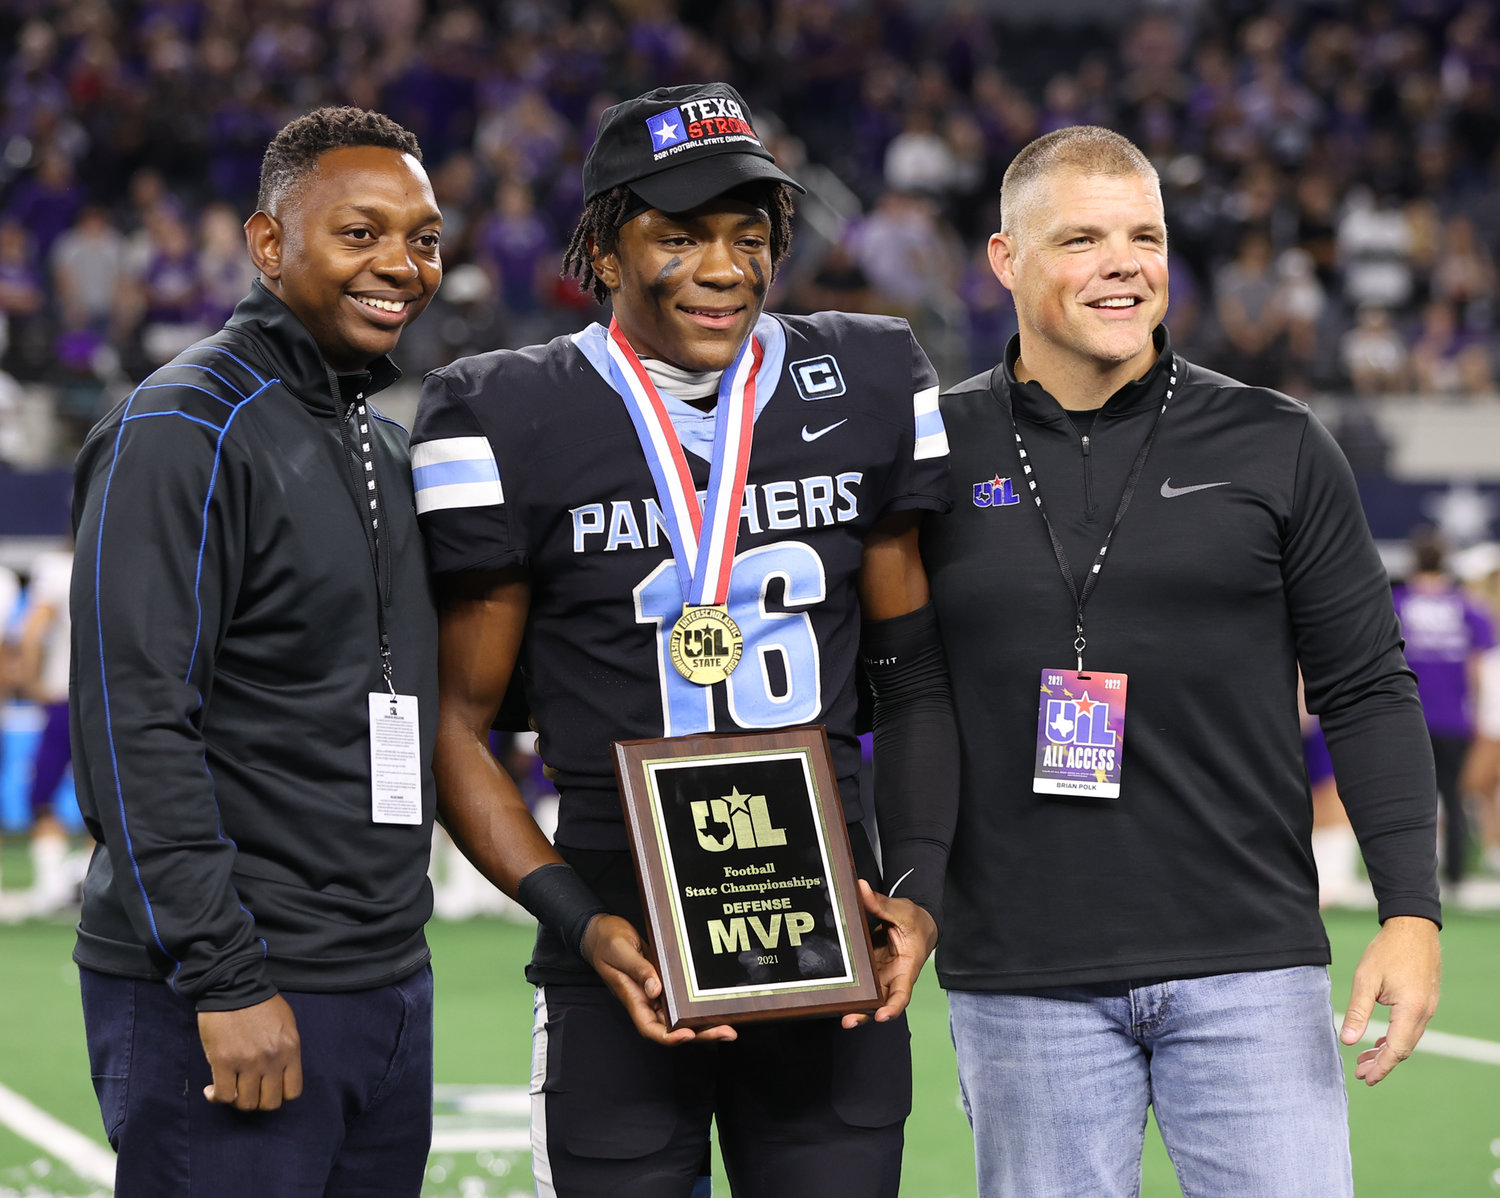 Paetow Panthers defensive back Kentrell Webb (16) was named defensive MVP of the Class 5A Division I state football championship game on December 17, 2021 in Arlington, Texas.